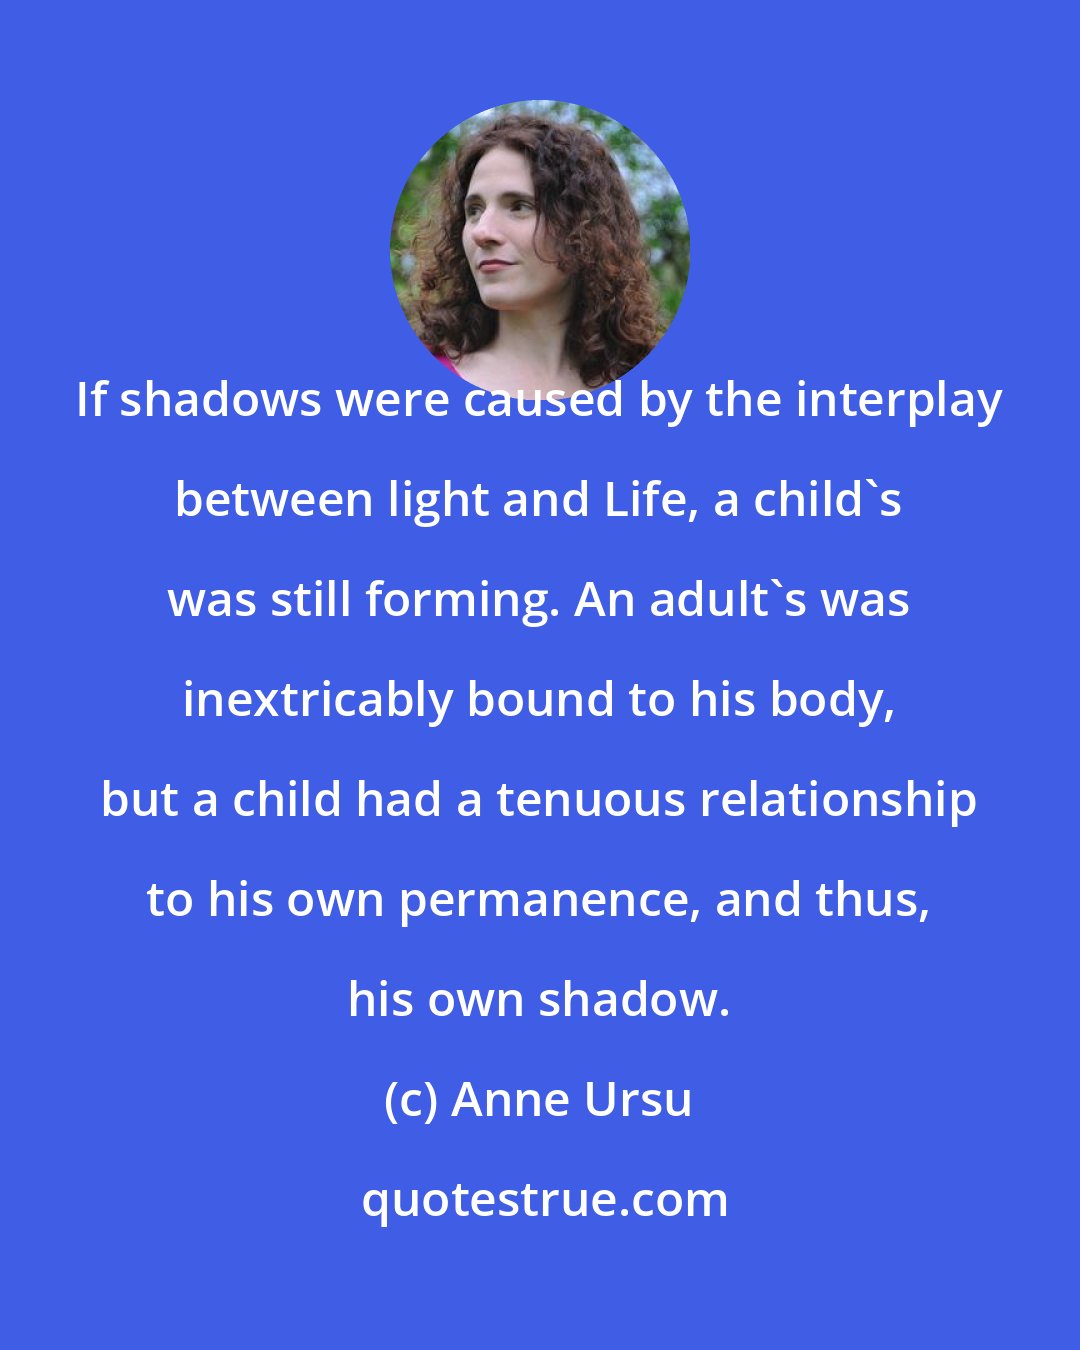 Anne Ursu: If shadows were caused by the interplay between light and Life, a child's was still forming. An adult's was inextricably bound to his body, but a child had a tenuous relationship to his own permanence, and thus, his own shadow.